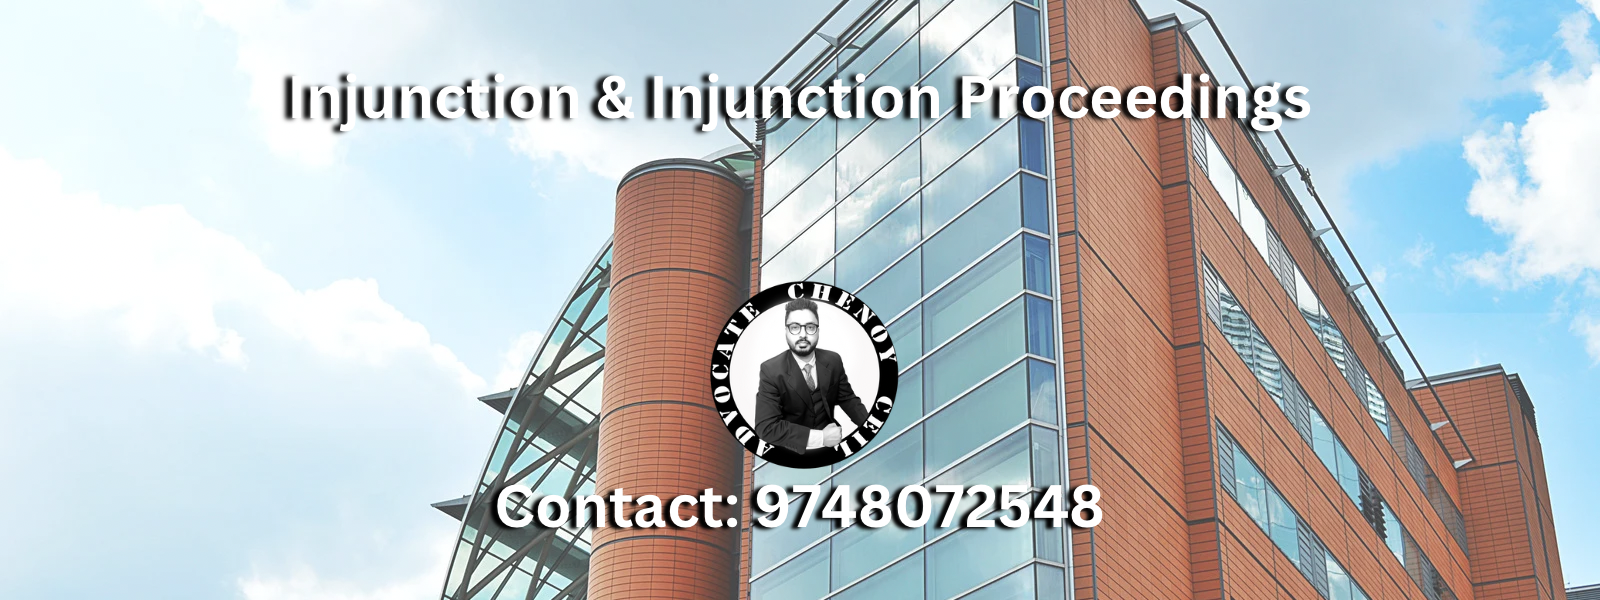 Injunction and Injunction Proceedings